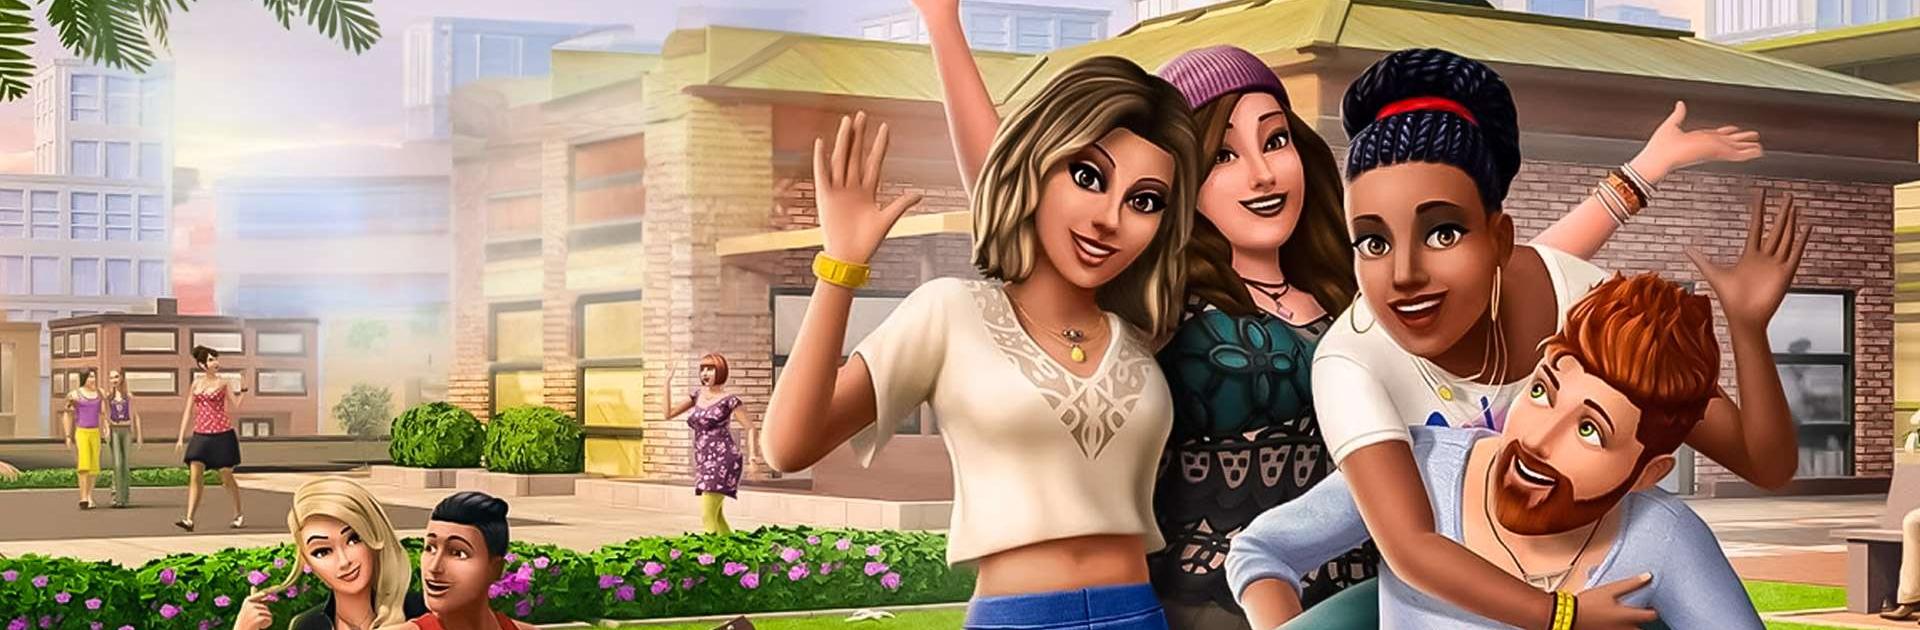 The Sims Mobile - Social Features in The Sims Mobile